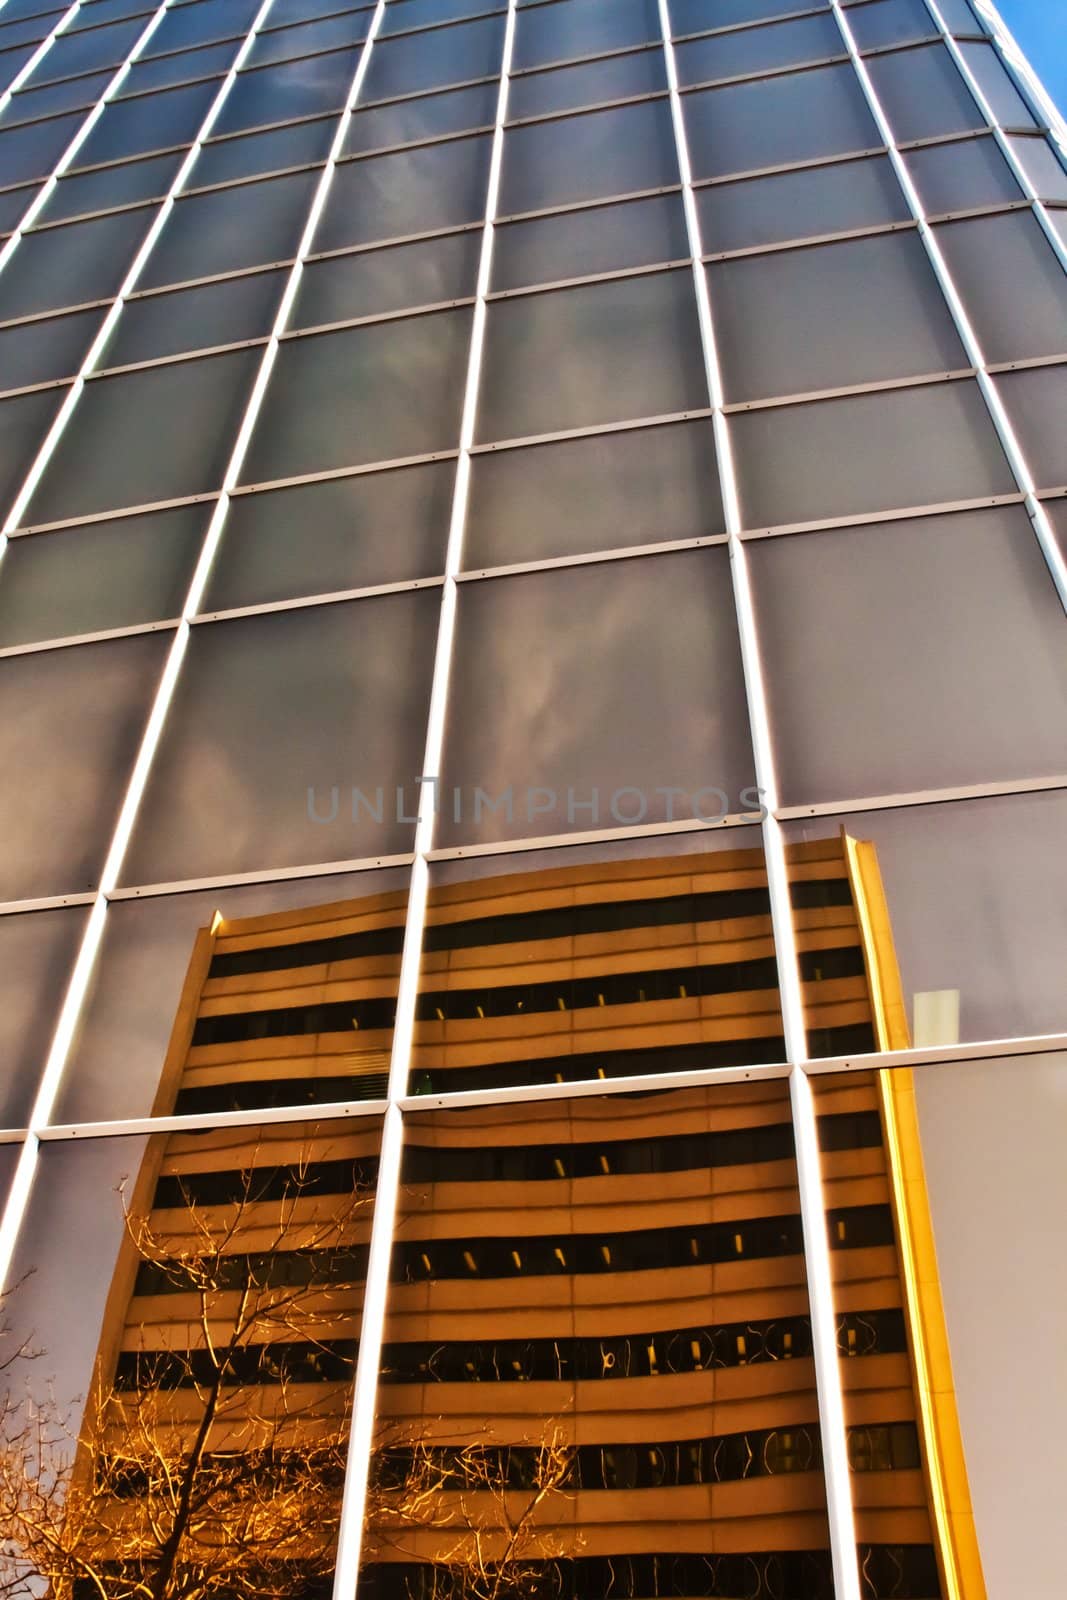 Reflective Building of Orange and Blue by RachelD32